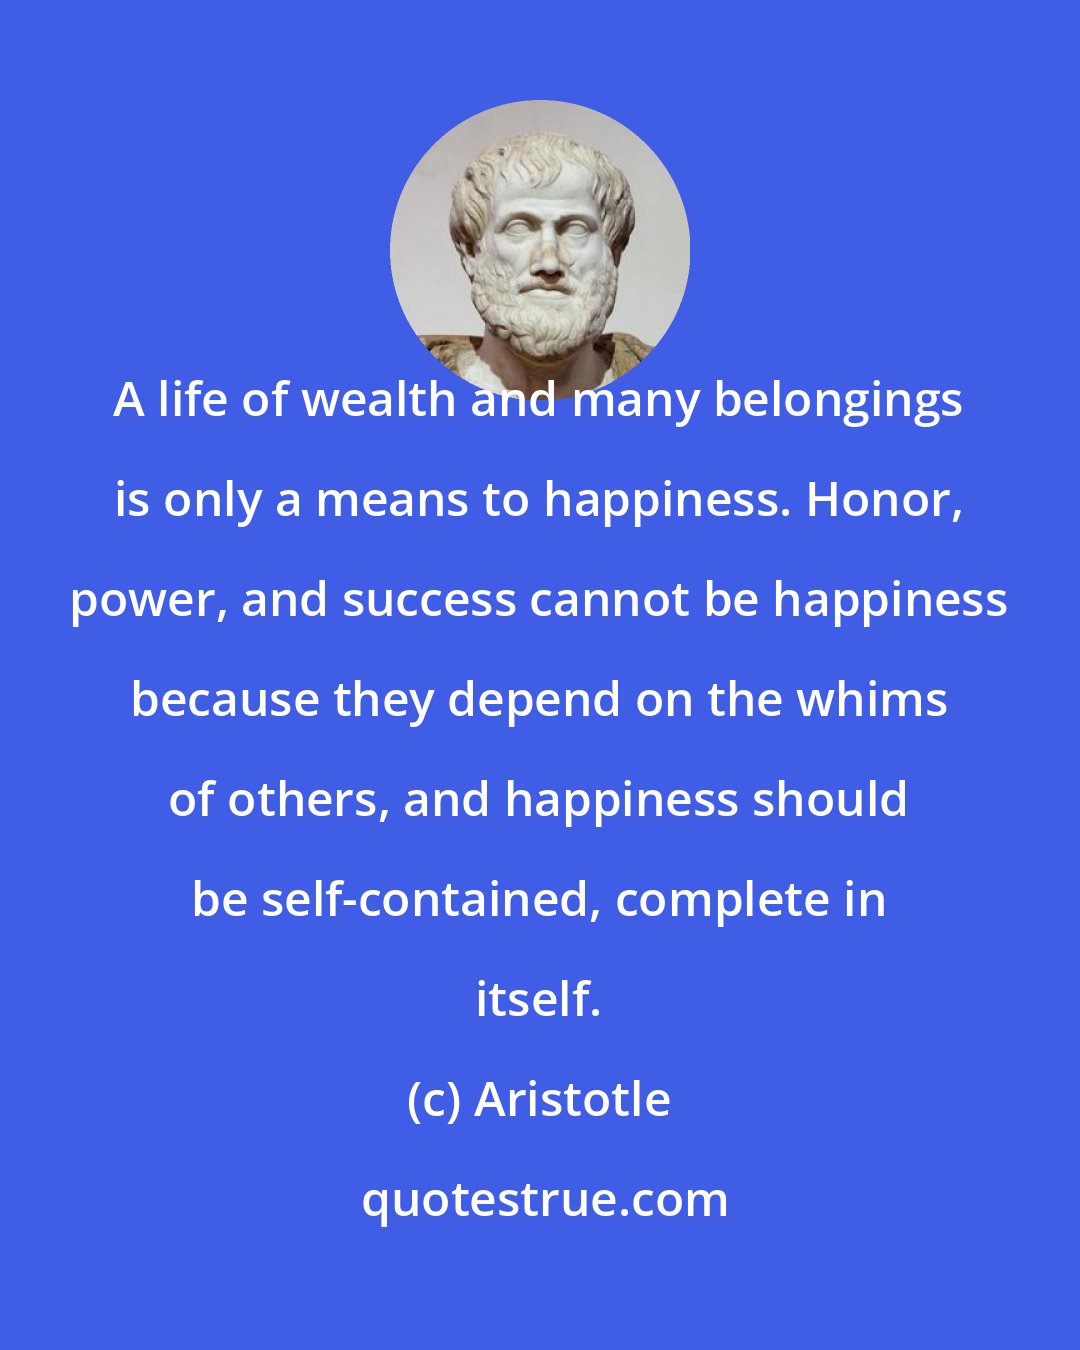 Aristotle: A life of wealth and many belongings is only a means to happiness. Honor, power, and success cannot be happiness because they depend on the whims of others, and happiness should be self-contained, complete in itself.